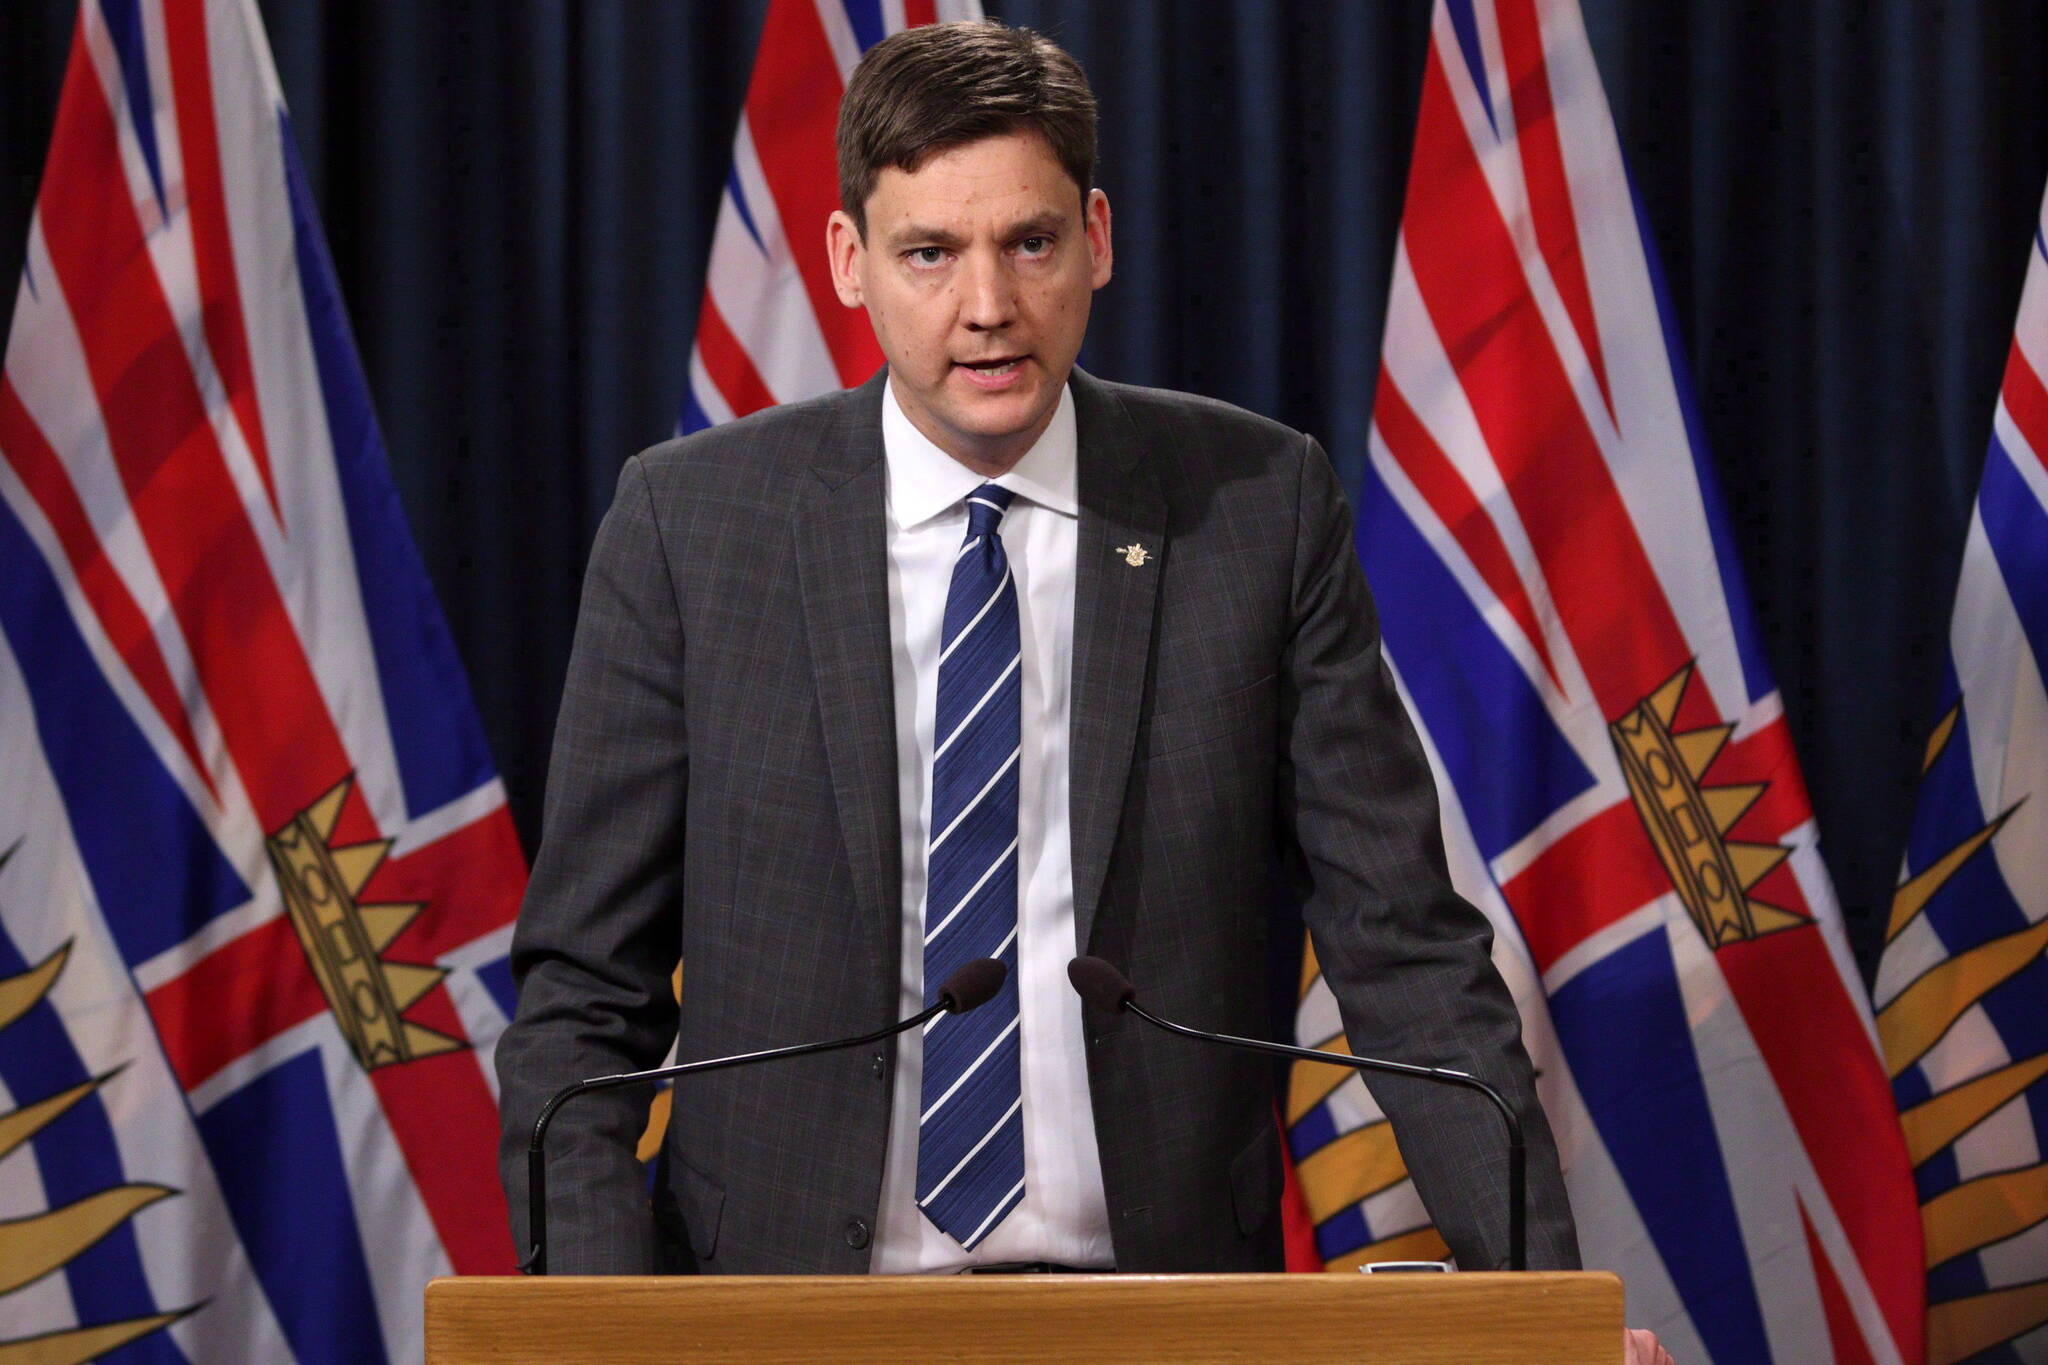 Premier David Eby promises to work with Jewish leaders to “root” out B.C.’s “serious problem with rising anti-Semitism” (Photo: THE CANADIAN PRESS/Chad Hipolito)